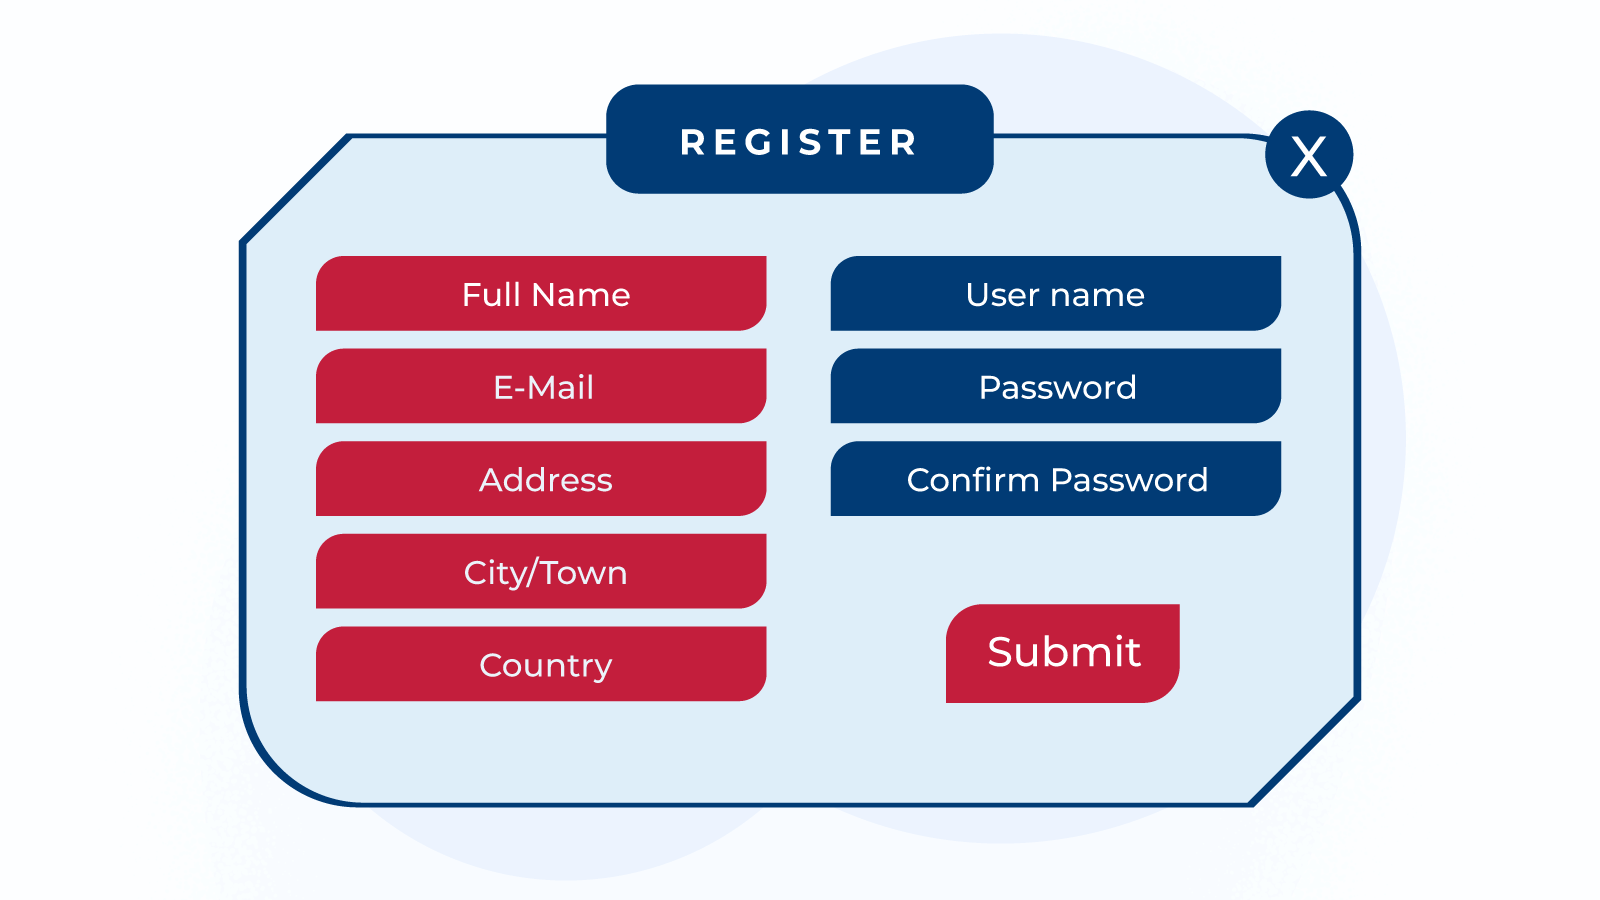 Register using correct and up-to-date information